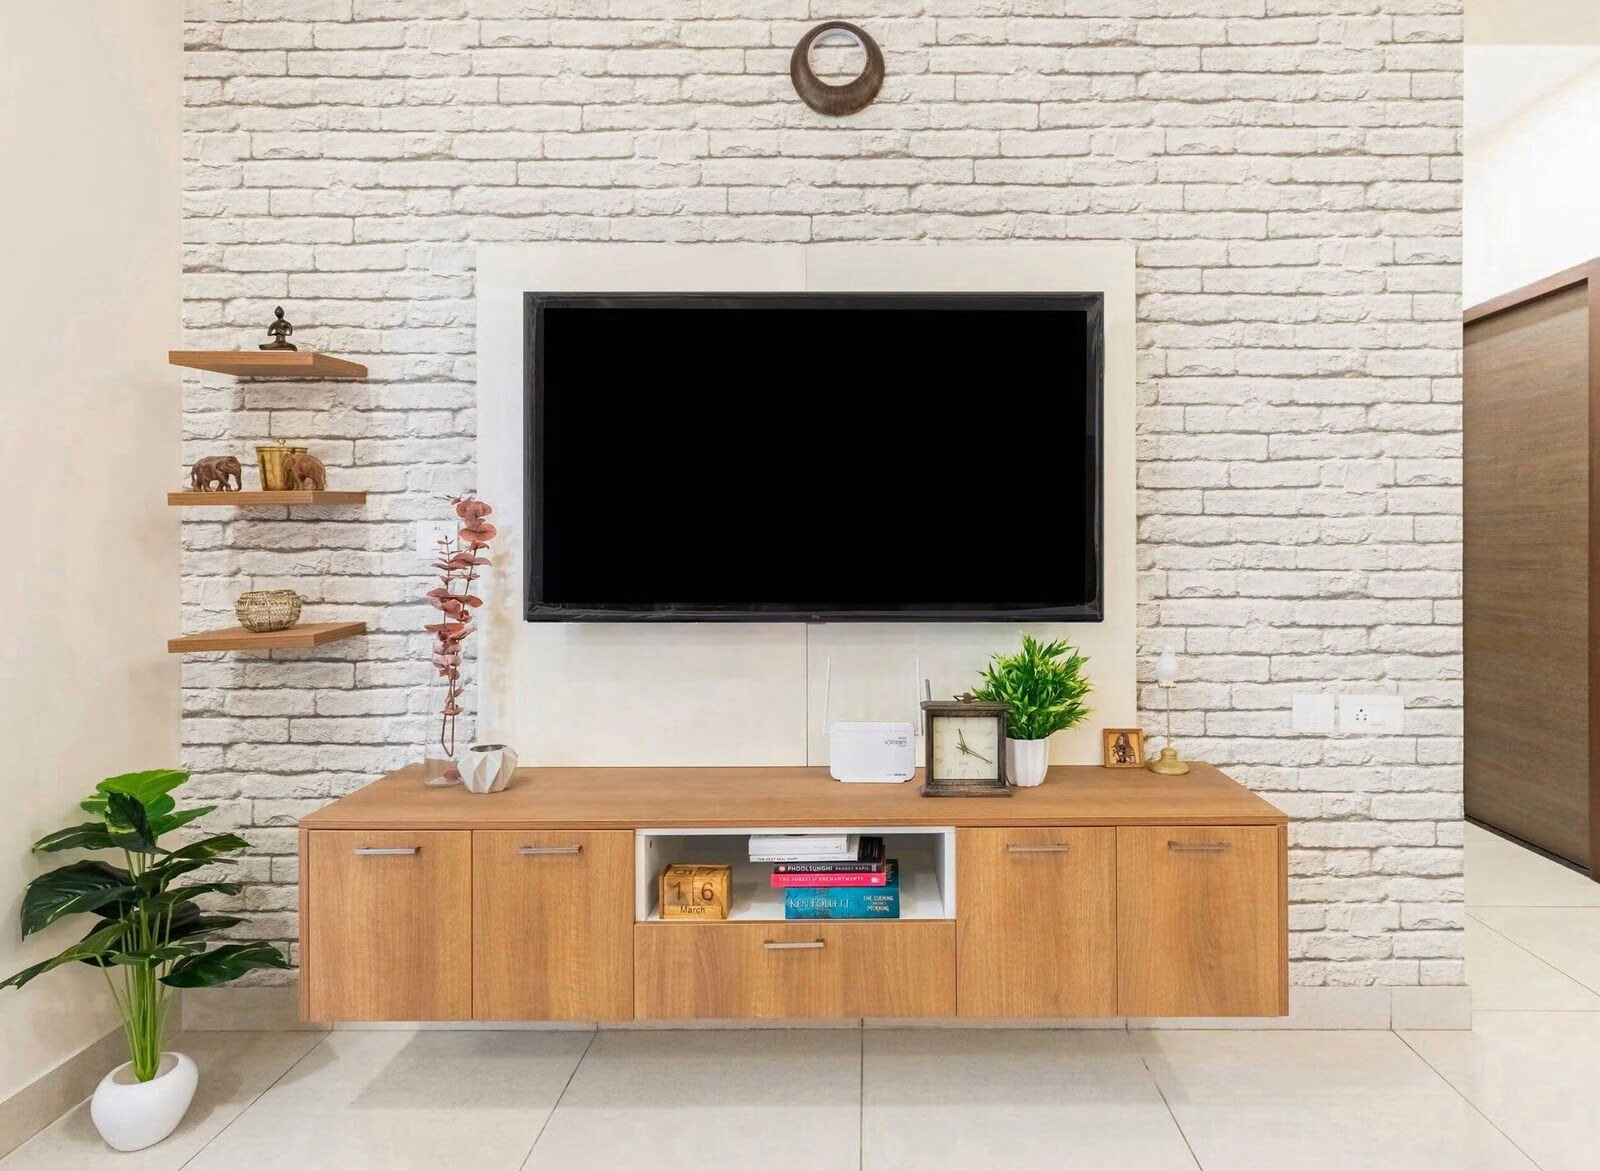 TV Stand Decor: How to Decorate a TV Stand